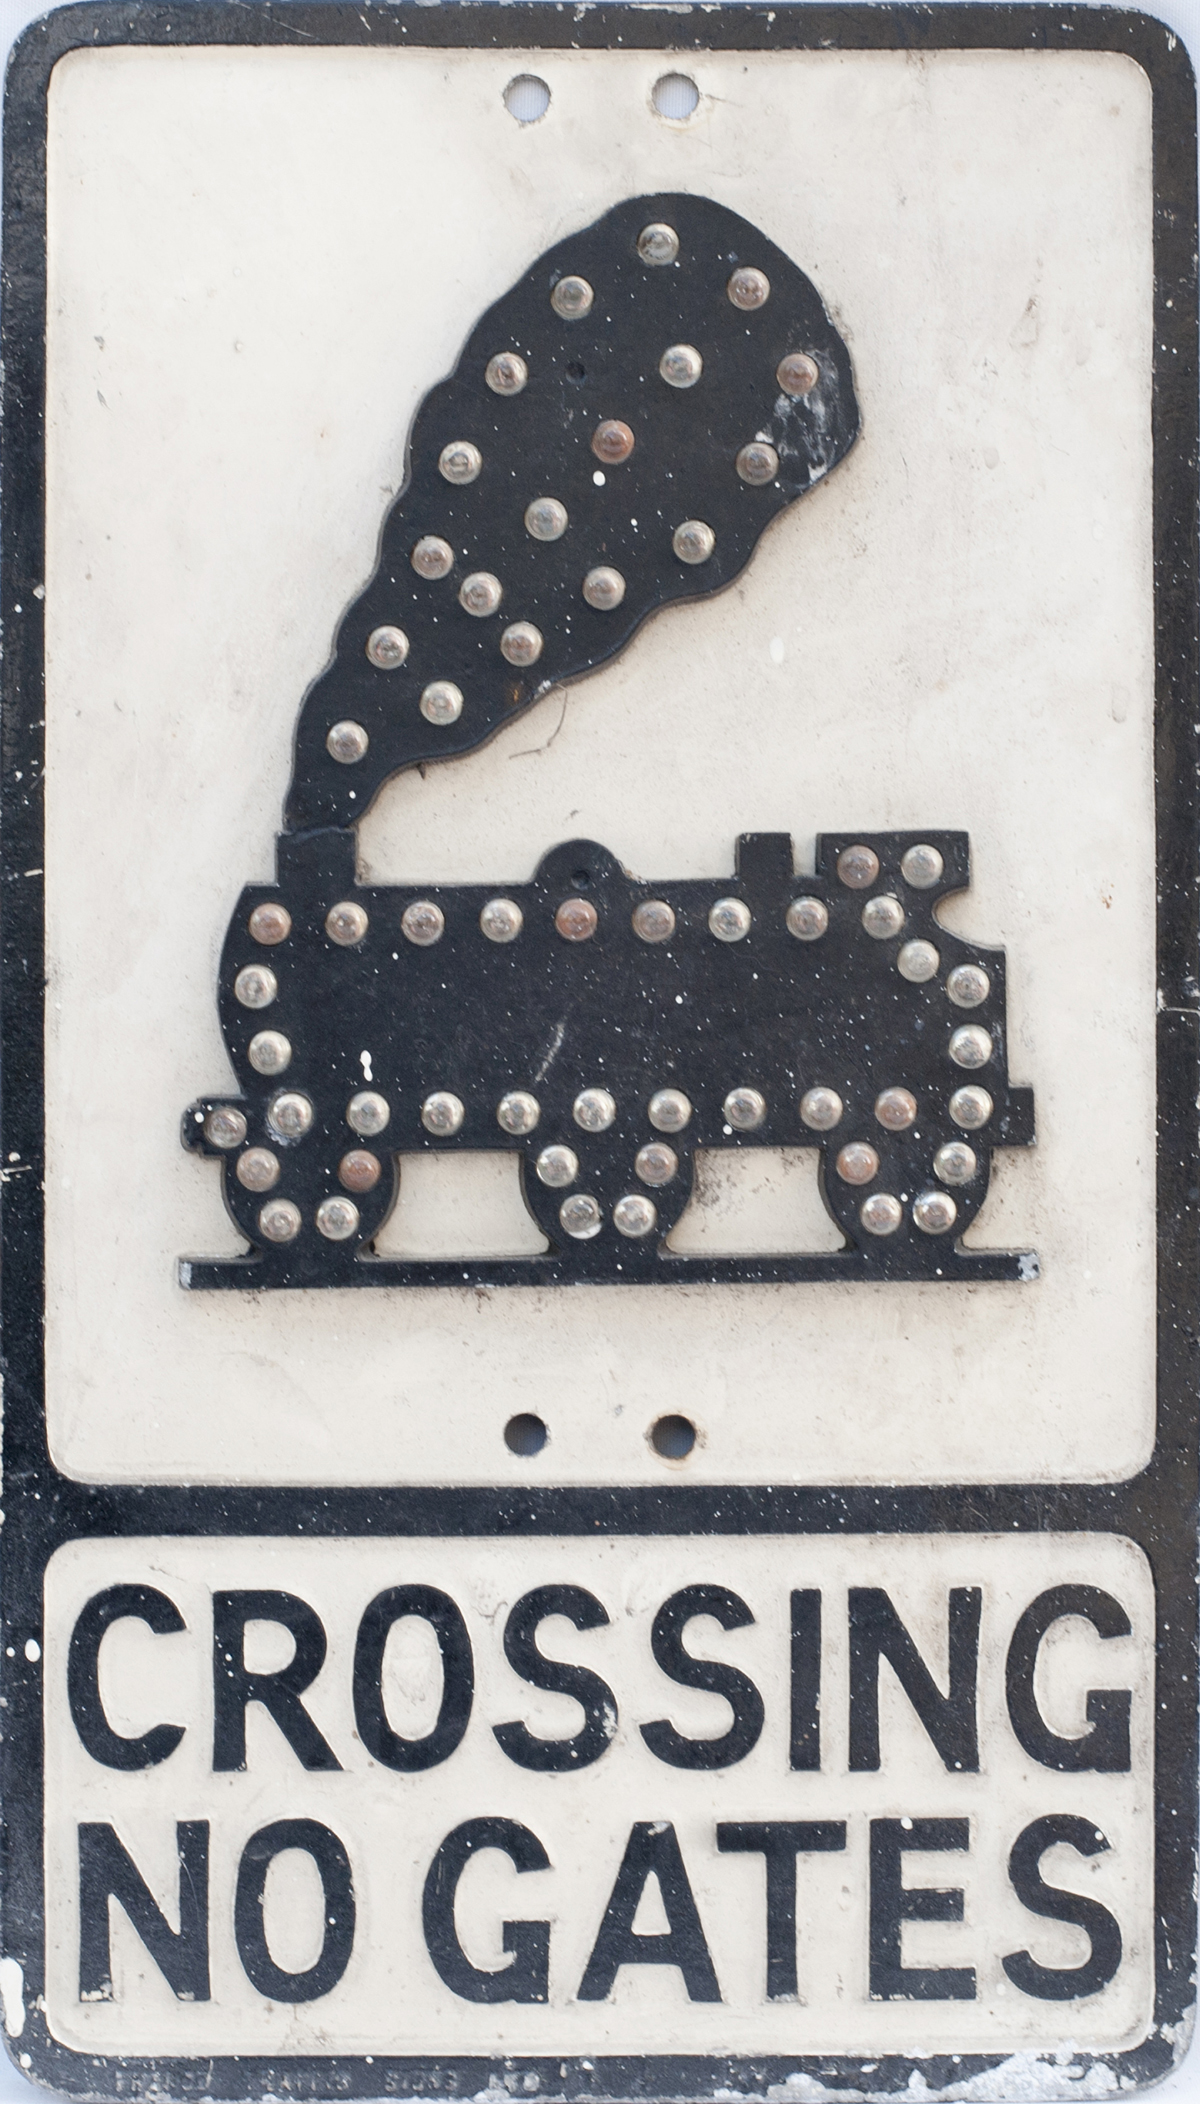 Cast aluminium road sign CROSSING NO GATES 0-6-0 engine, with makers name Franco Traffic Signs Ltd